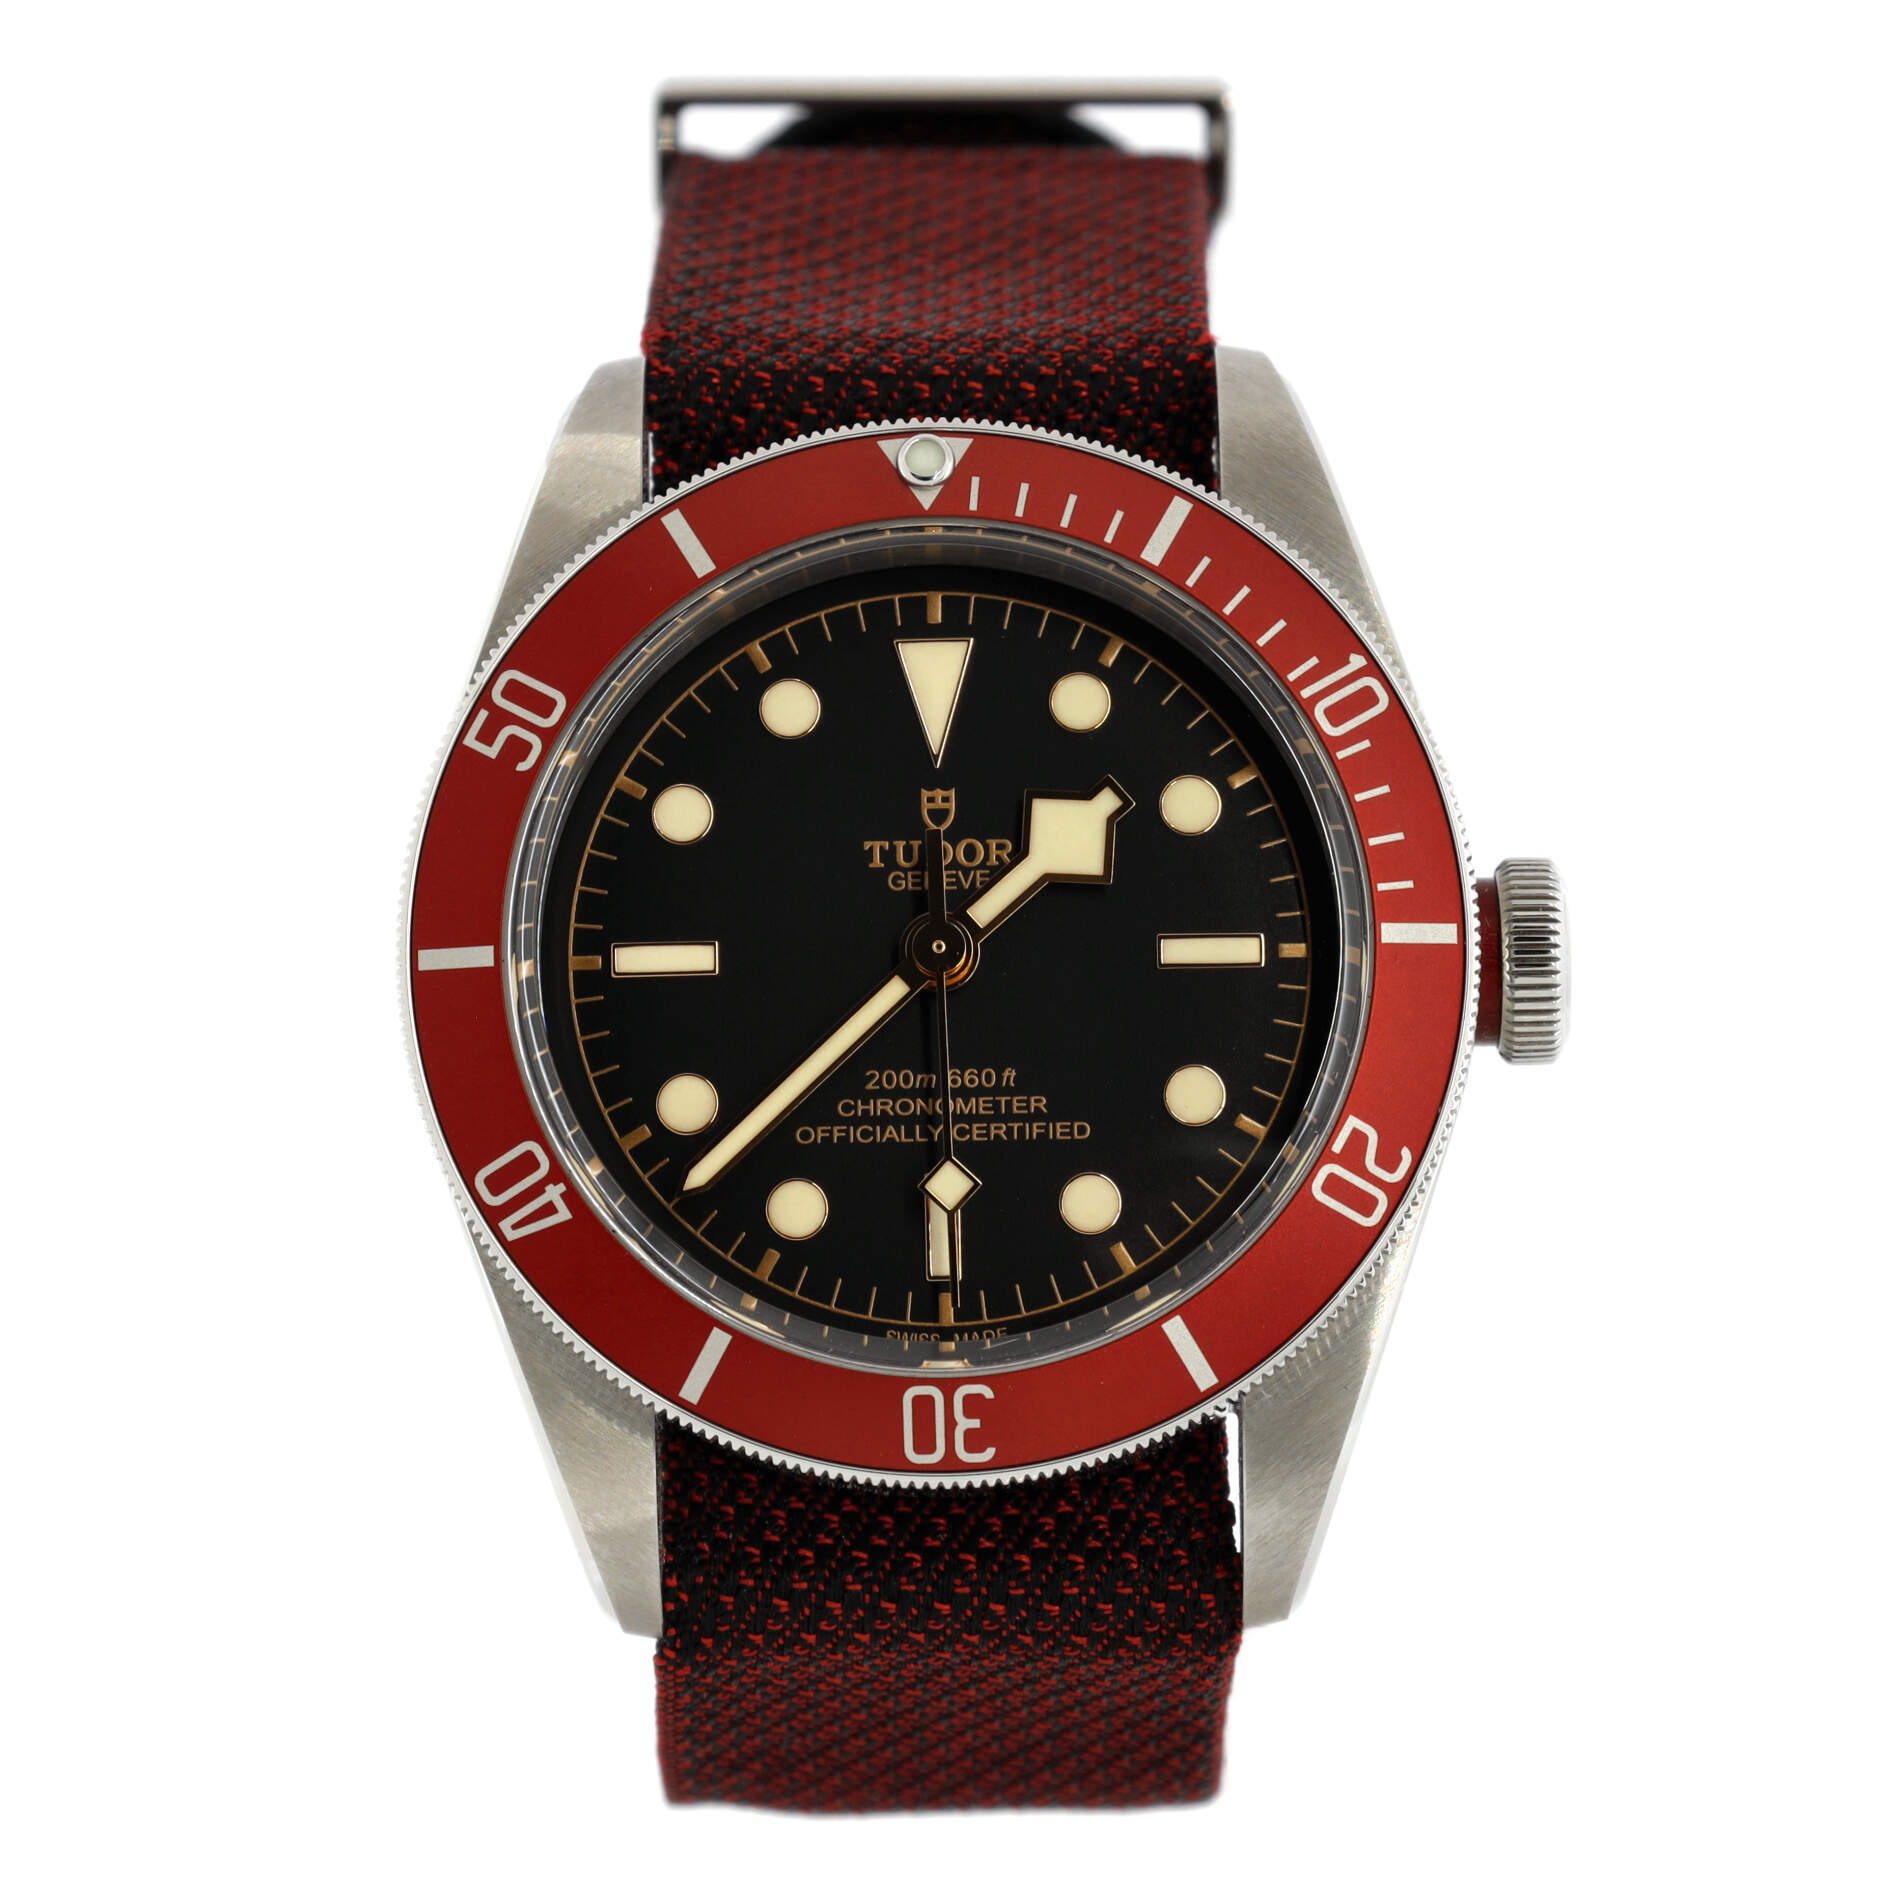 Heritage Black Bay Automatic Watch (79230R)